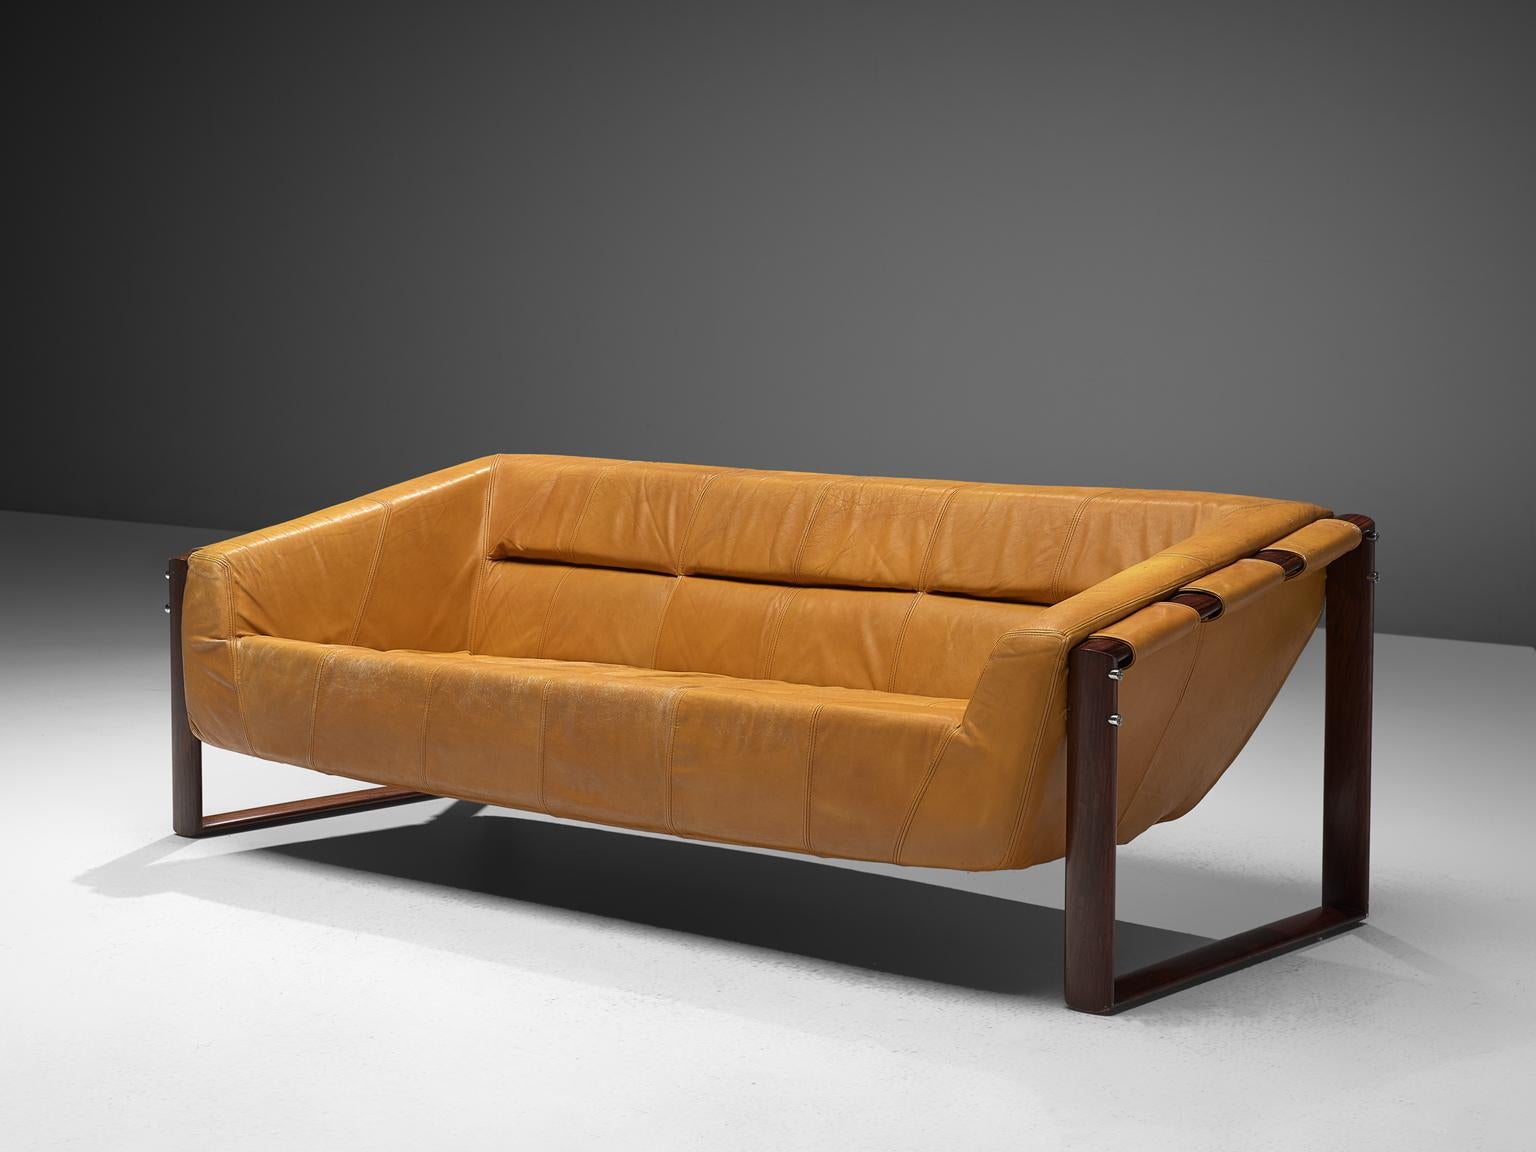 Percival Lafer, sofa, leather and rosewood, Brazil, late 1960s.

A wonderful three seat sofa by Brazilian designer Percival Lafer. This sofa consists of two geometric shaped rosewood frames, functioning as the legs and to hold up the actual seat